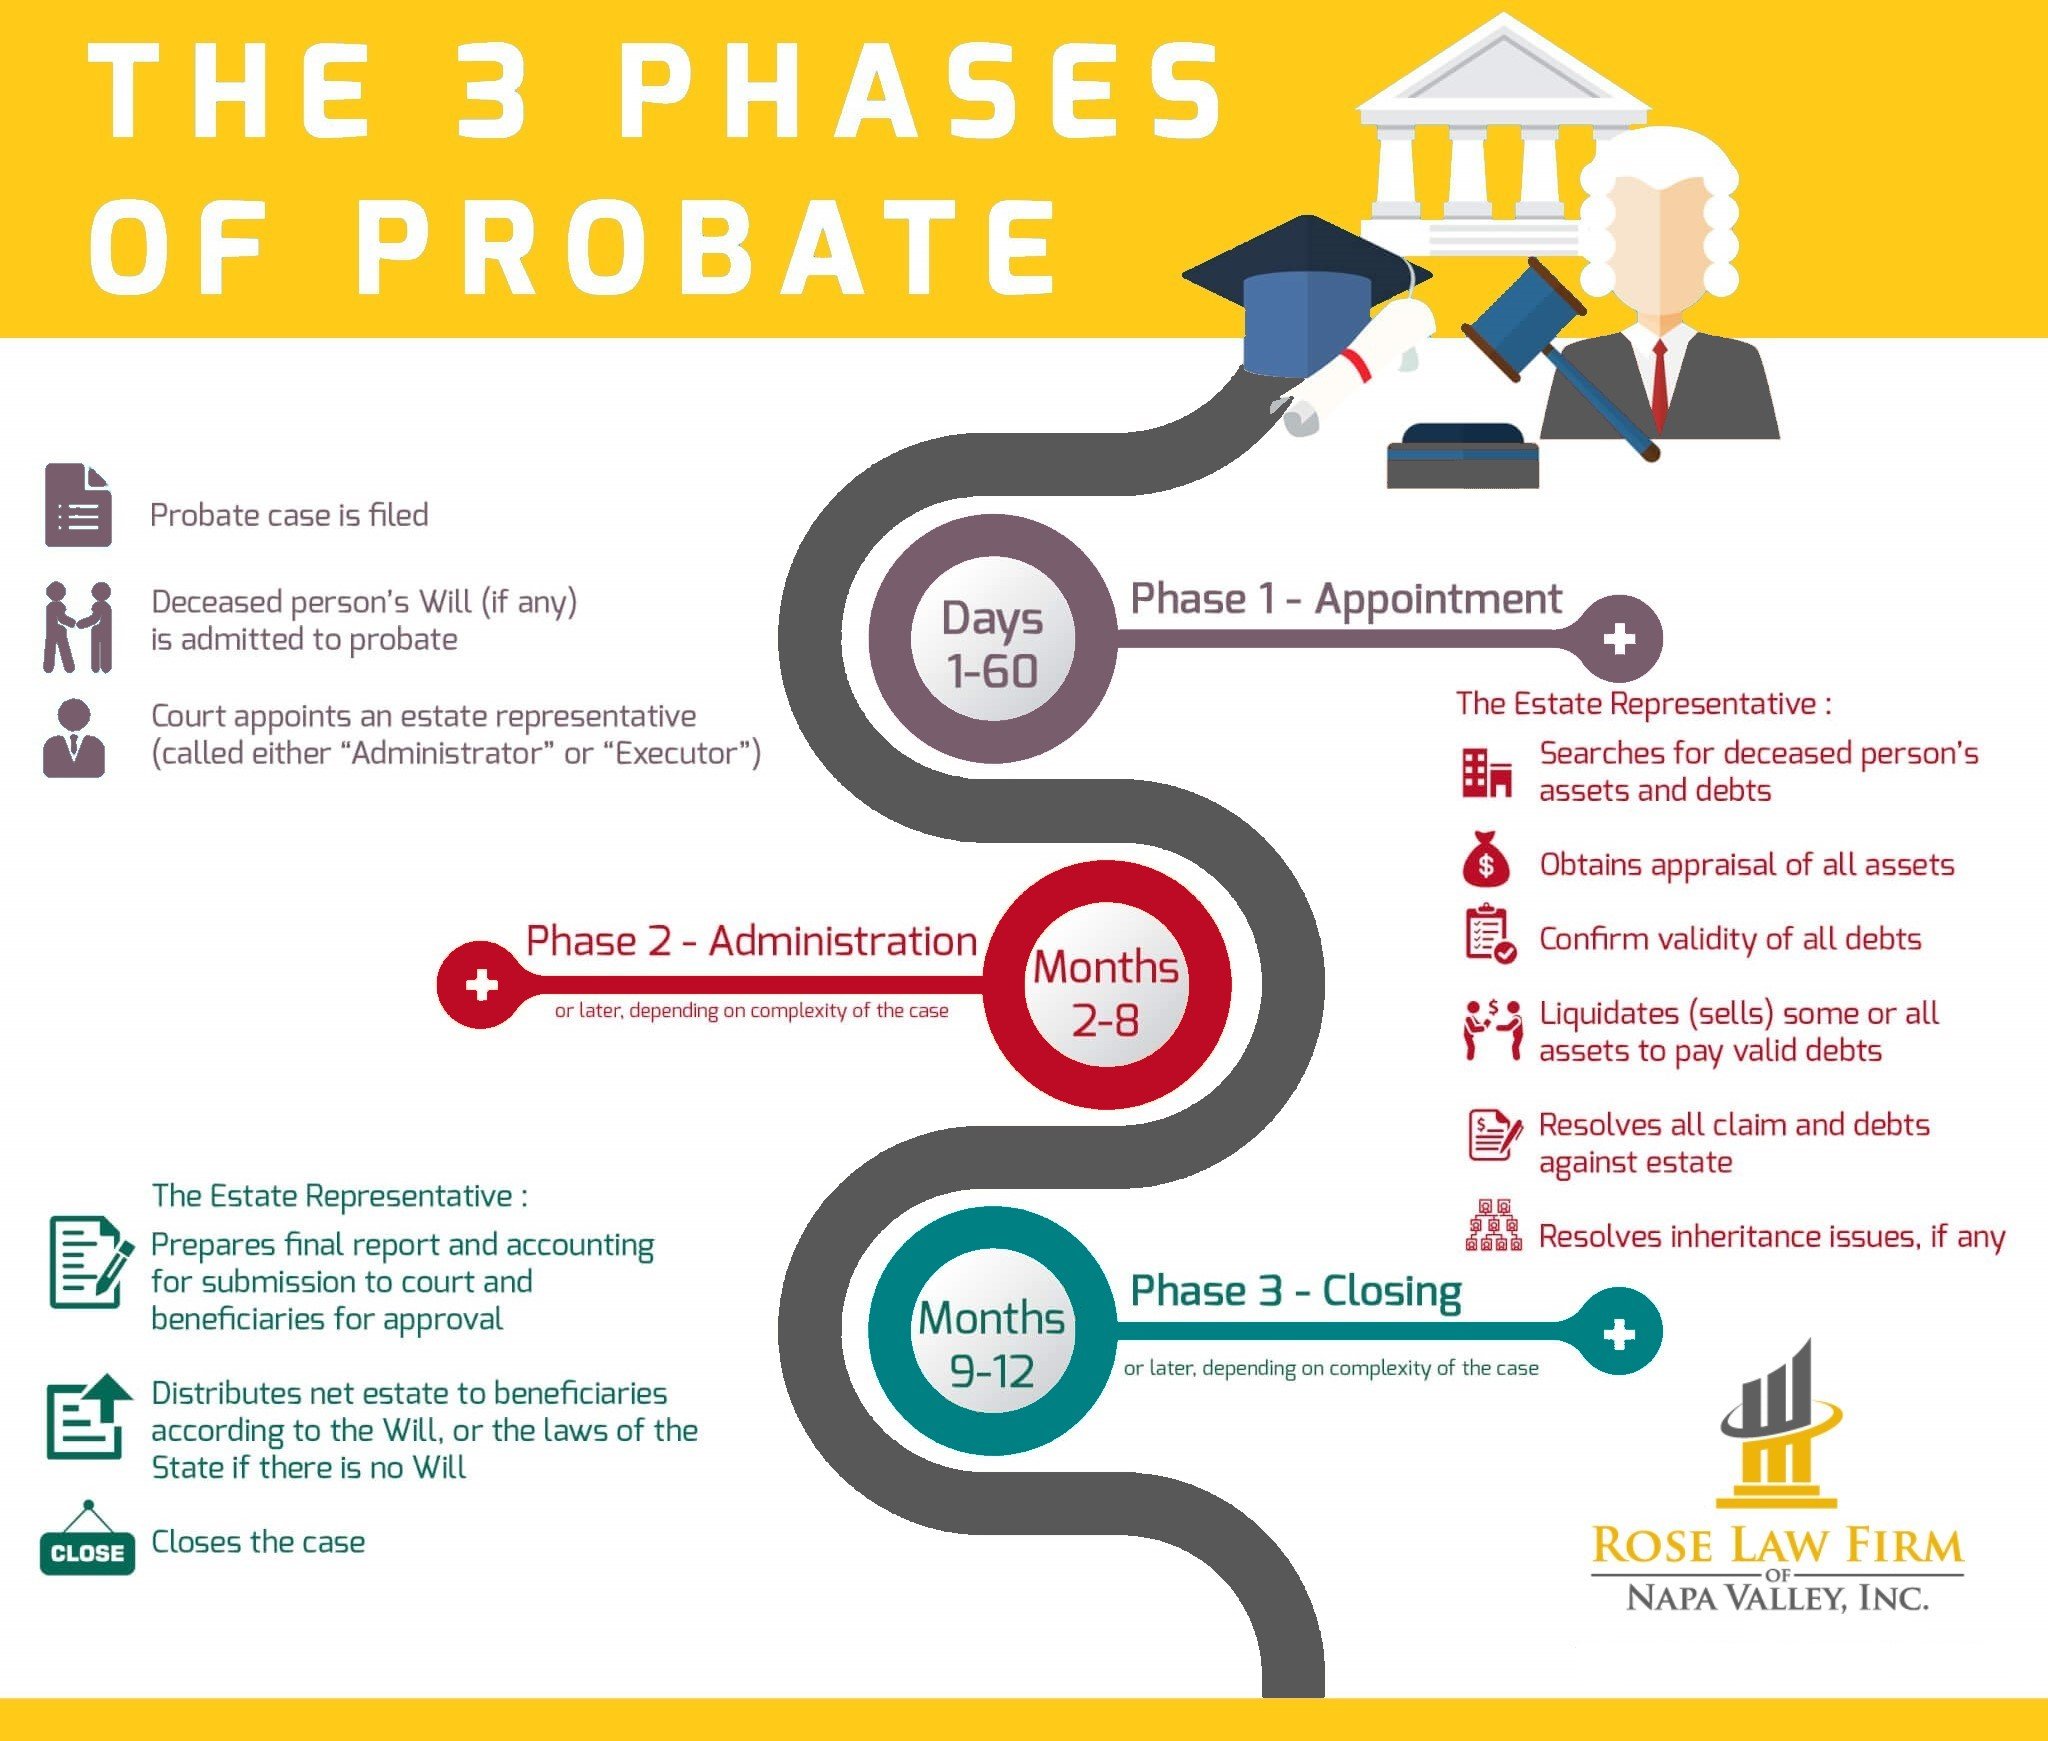 Understanding the legal process for probate and estate administration